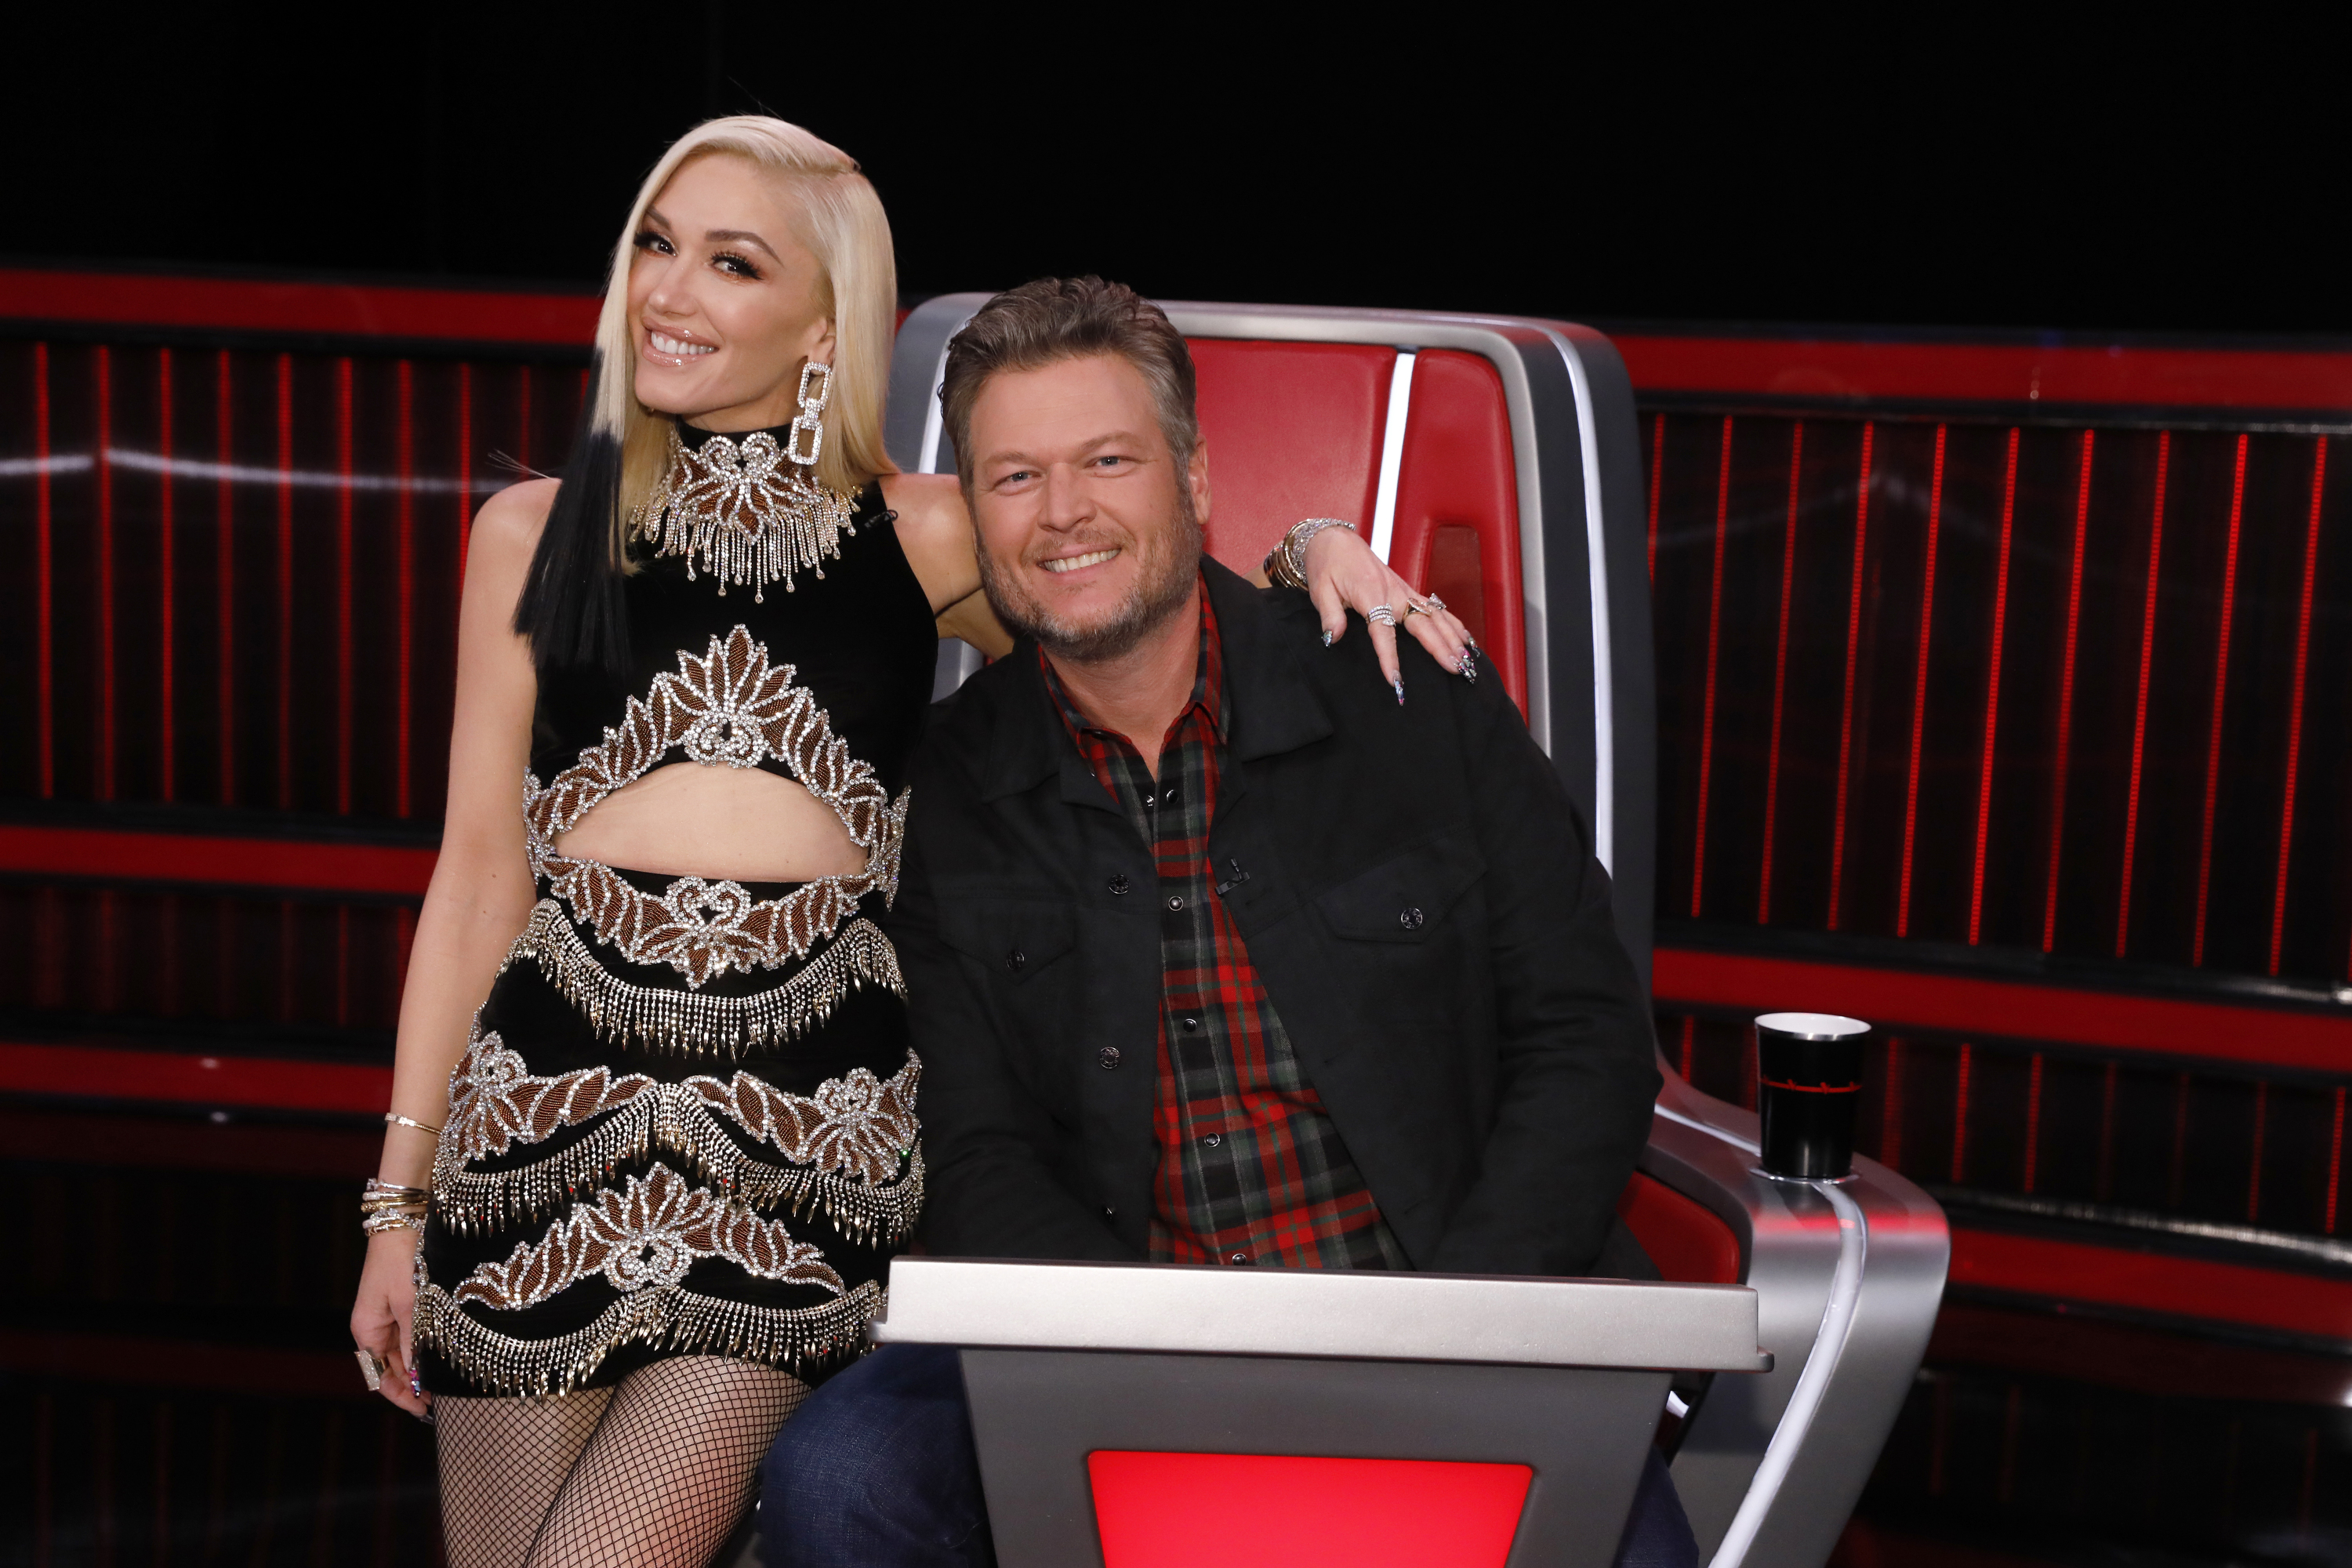 The two stars met while coaching on The Voice